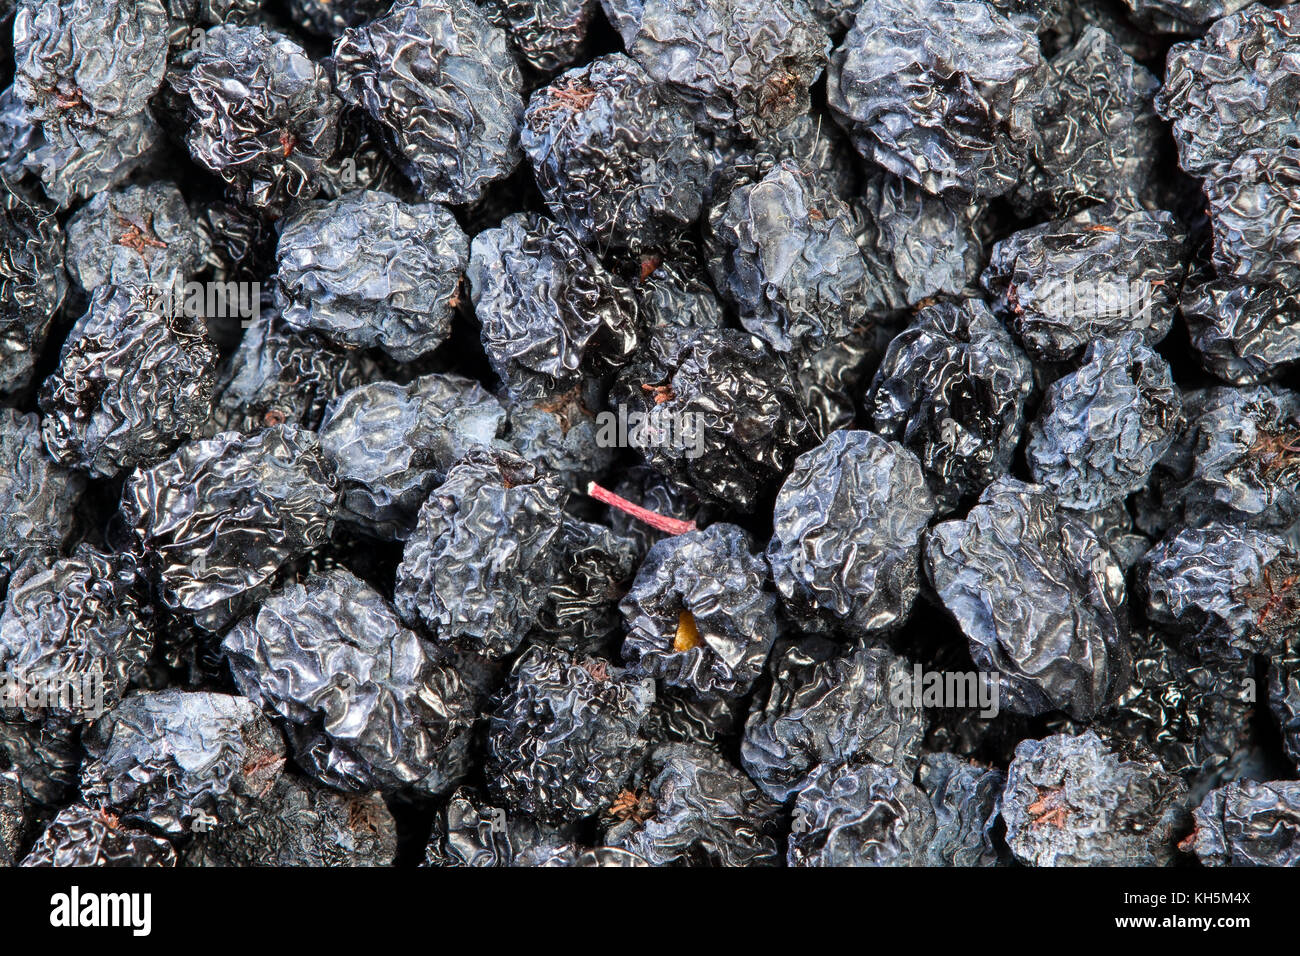 Texture of dried black aronia berries, food background Stock Photo